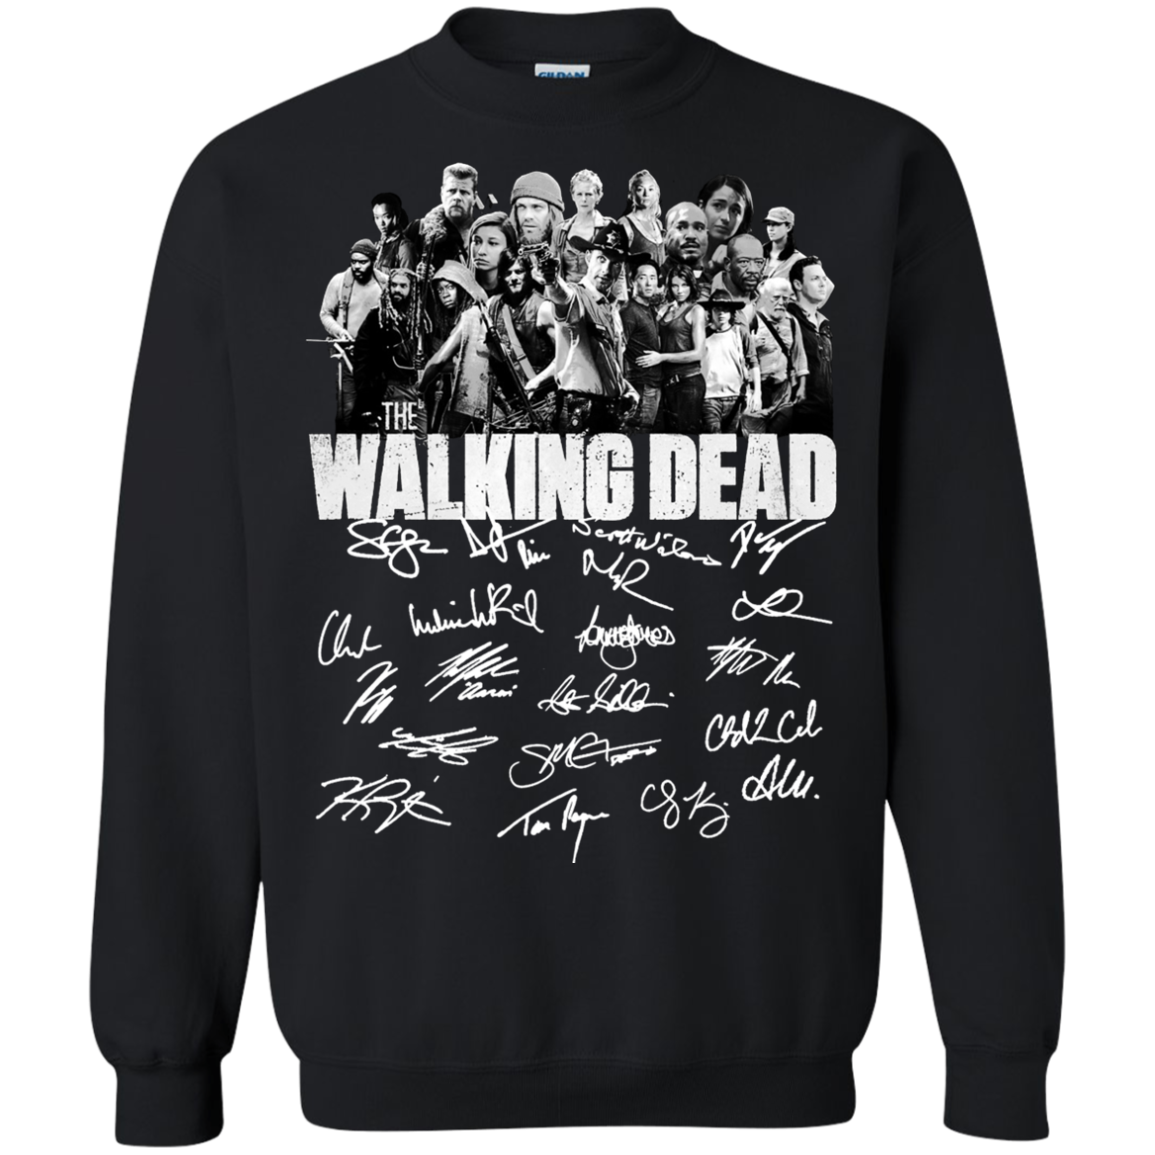 The Walking Dead Merchandise: Leather Jackets, Hoodies And T-Shirts